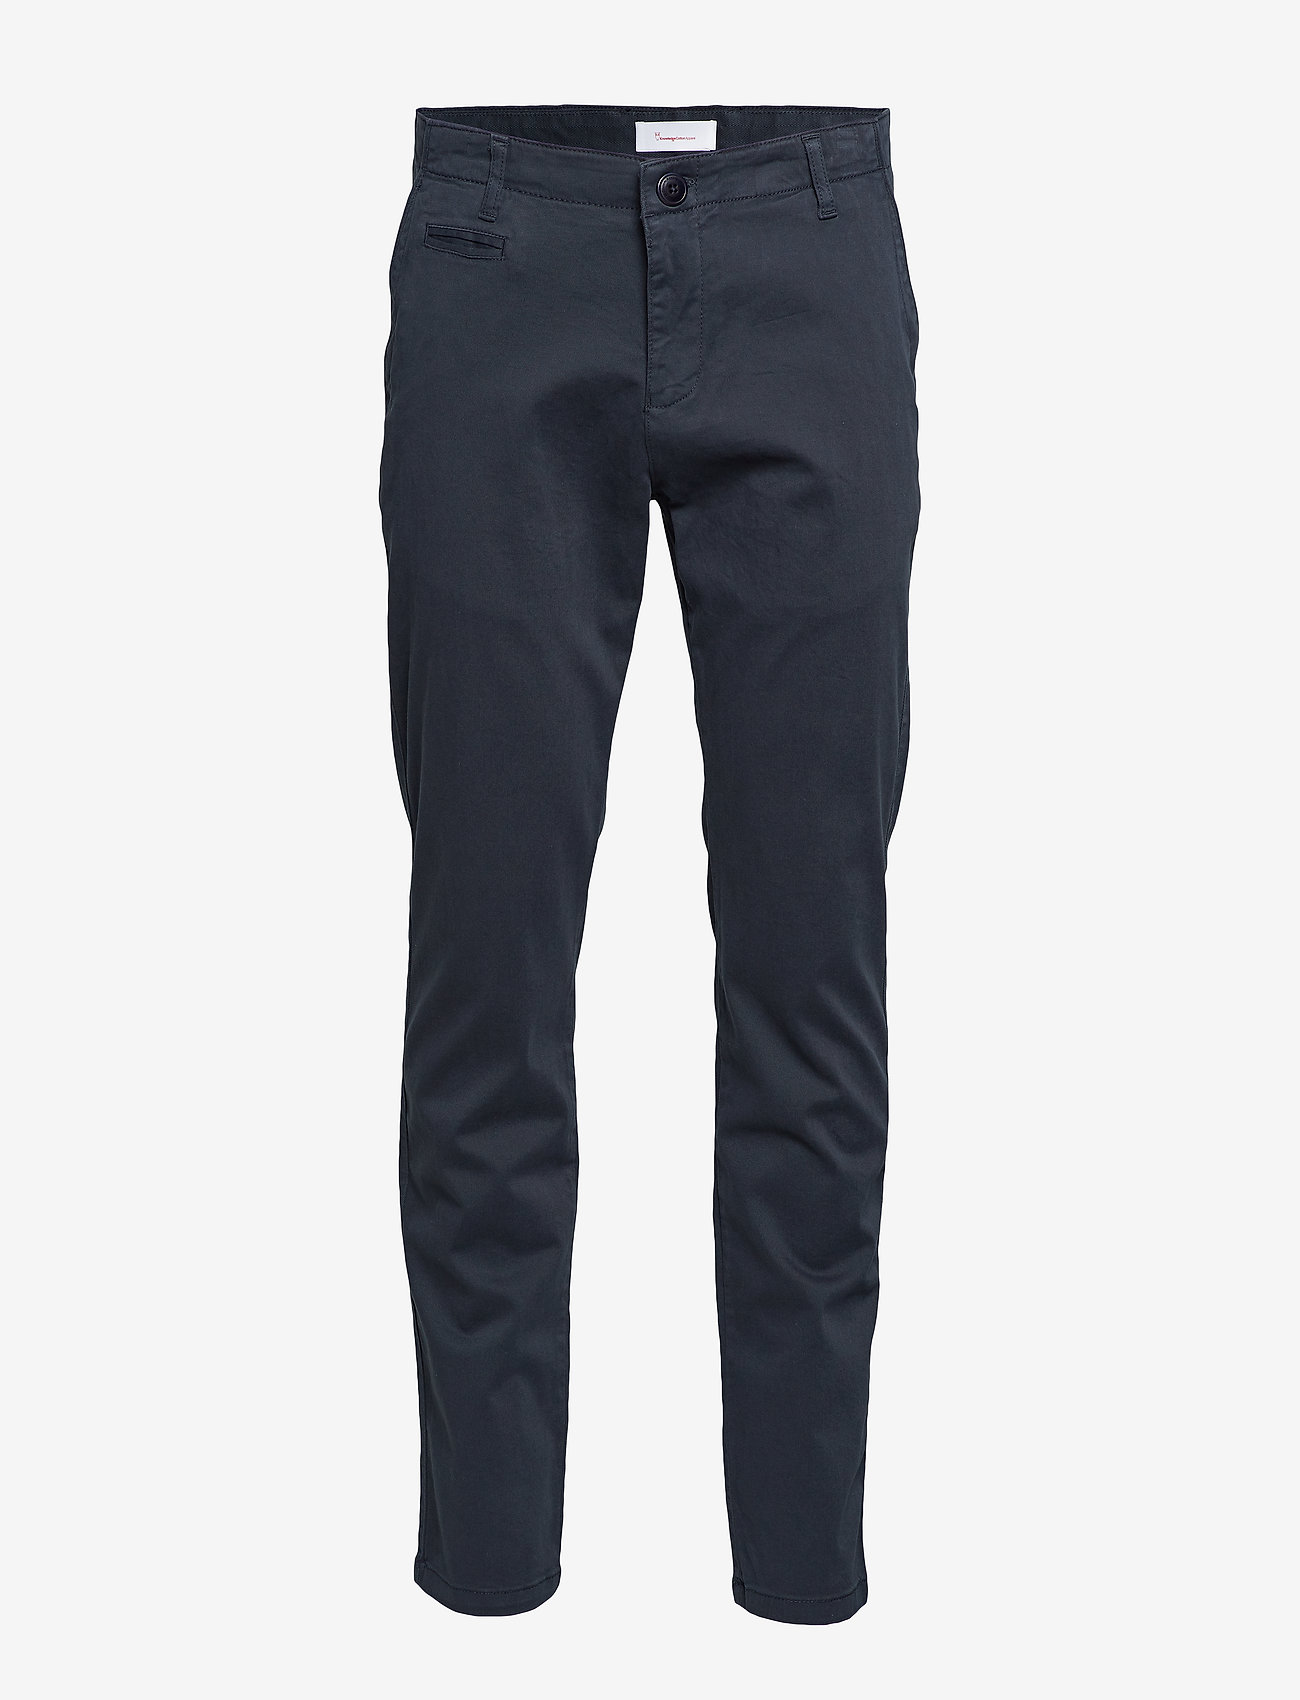 Knowledge Cotton Apparel - CHUCK regular stretched chino pant - chinos - total eclipse - 0